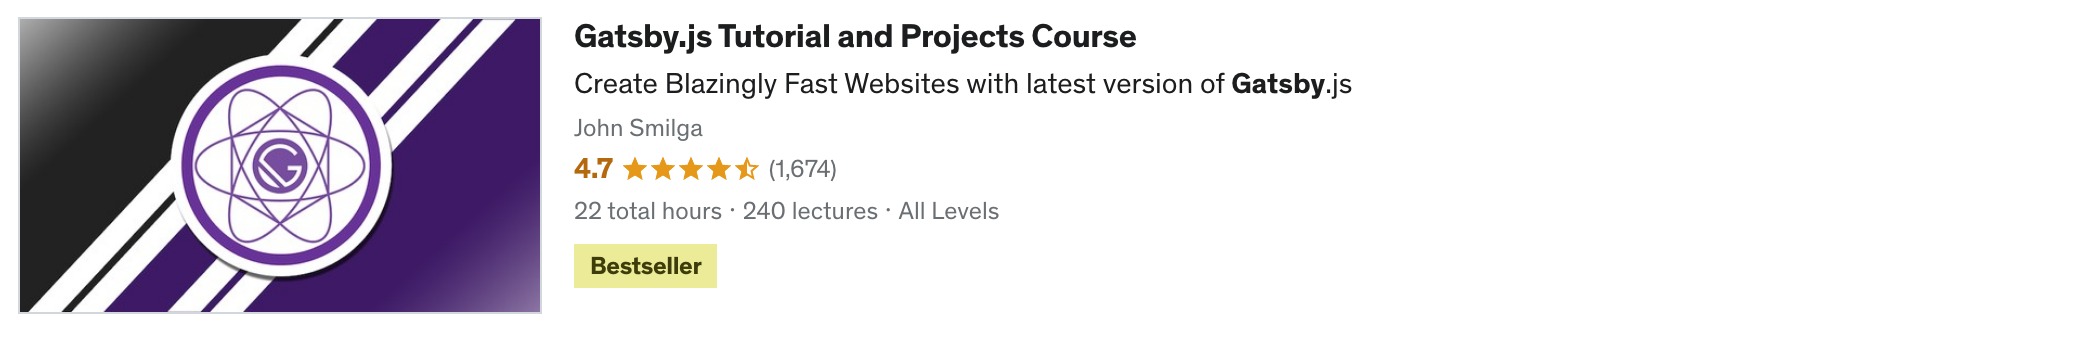 Gatsby.js Tutorial and Projects Course